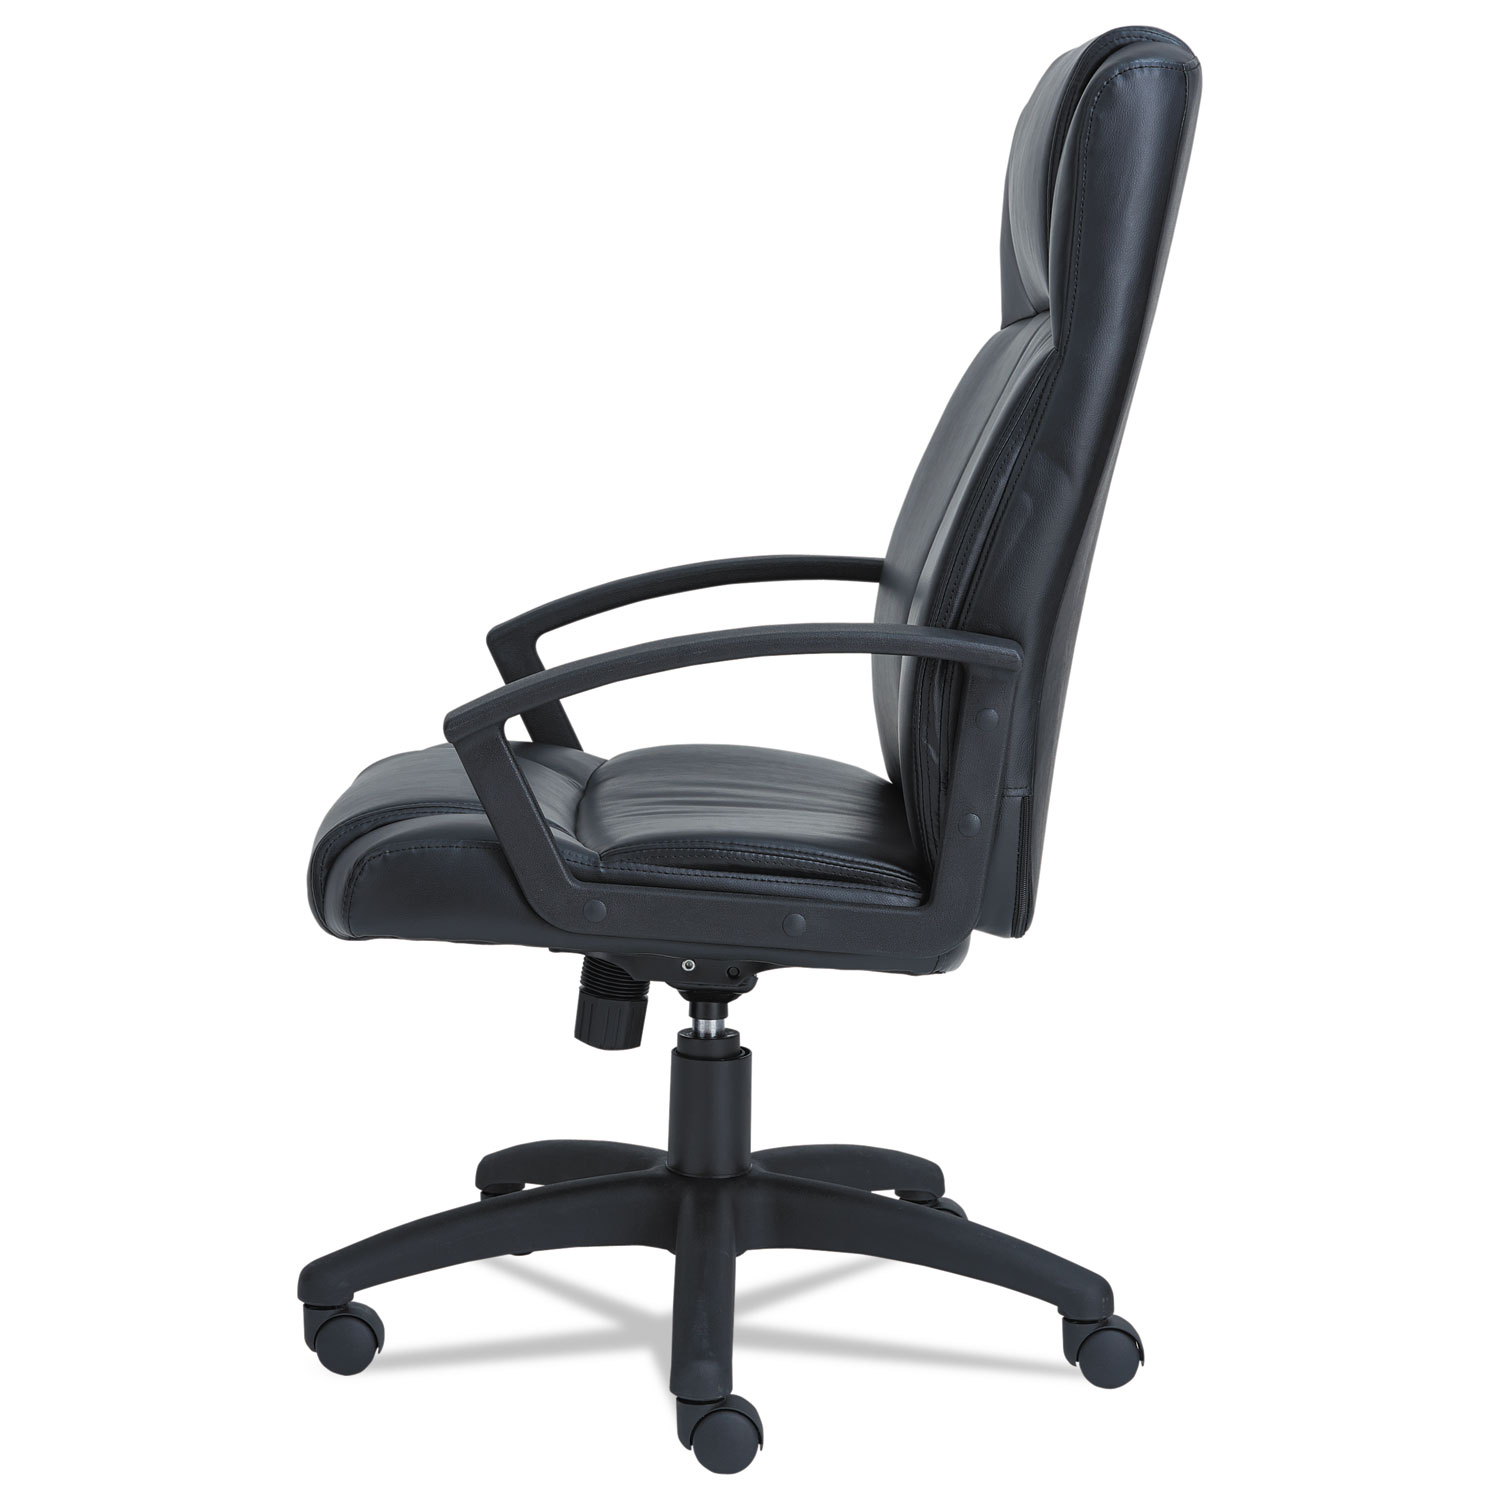 Alera CL Series High-Back Leather Chair, Black